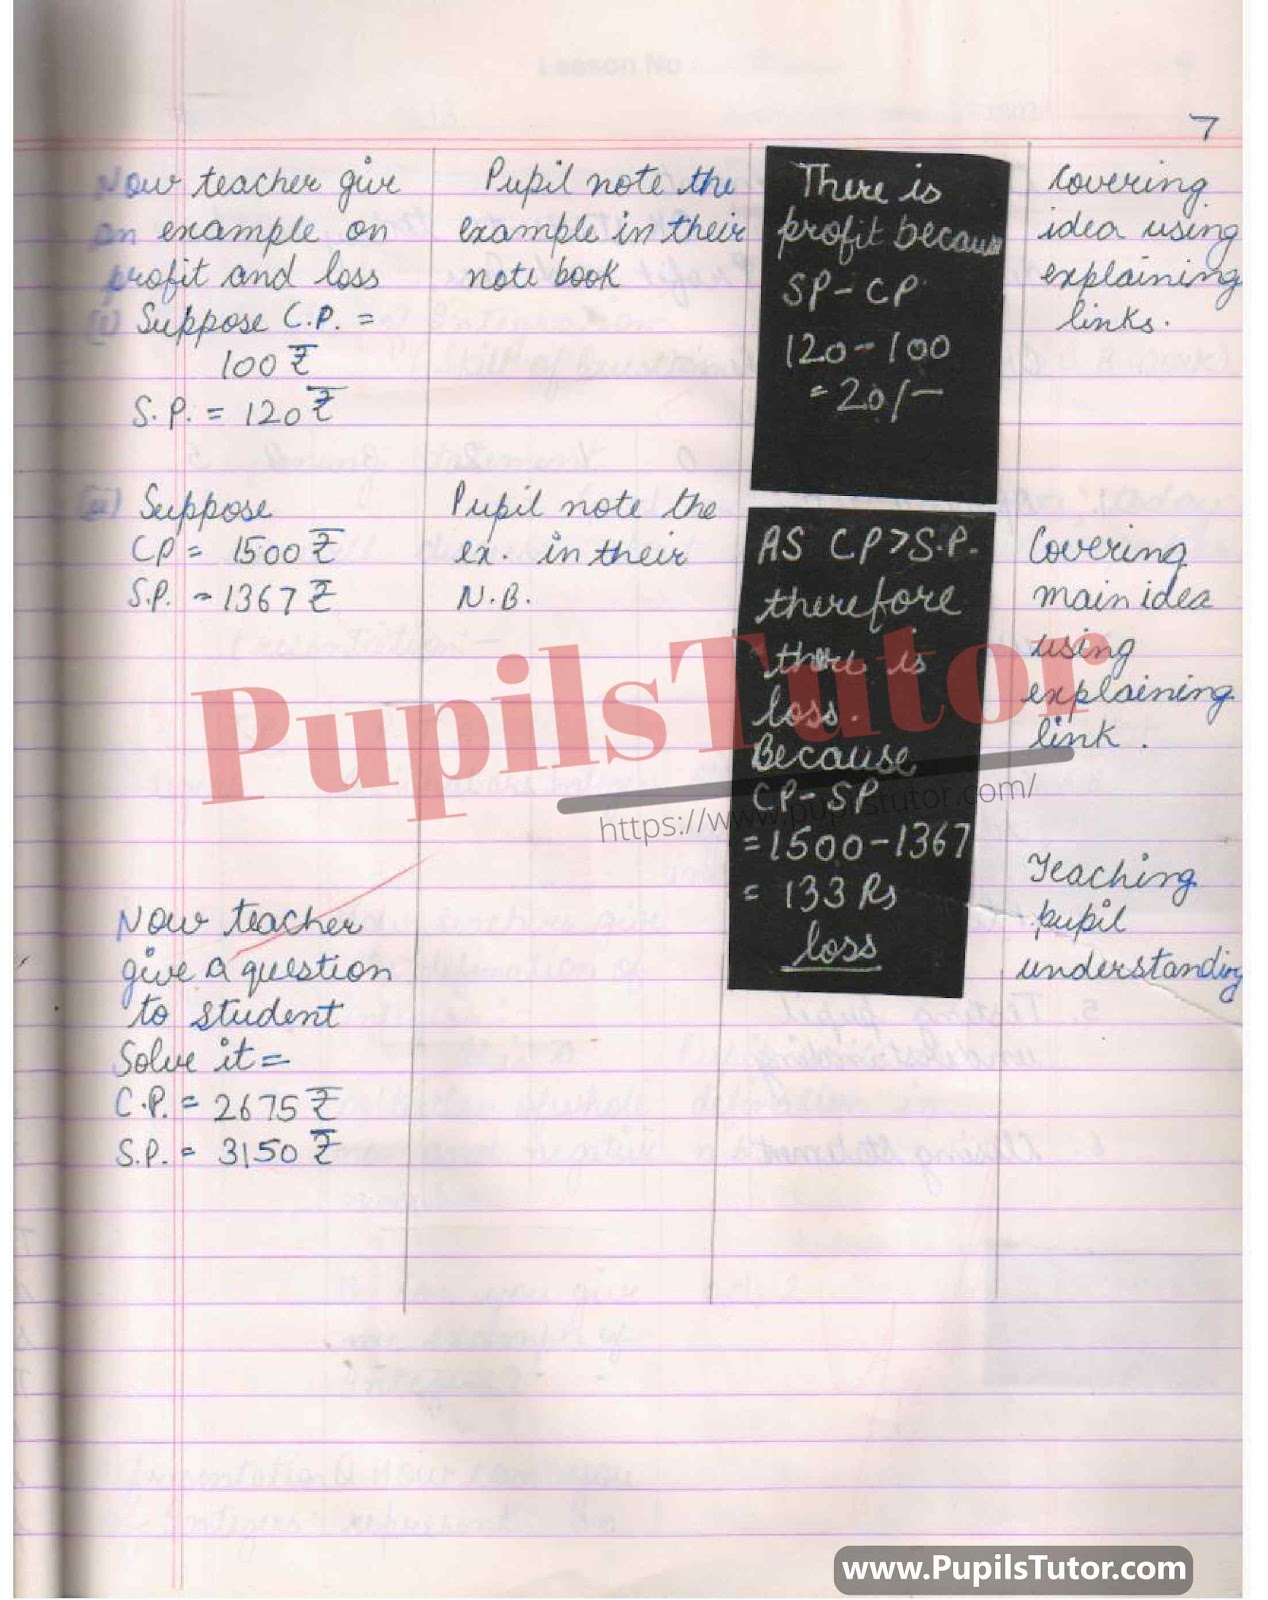 Mathematics Lesson Plan On Profit And Loss For Class/Grade 6 For CBSE NCERT School And College Teachers  – (Page And Image Number 3) – www.pupilstutor.com